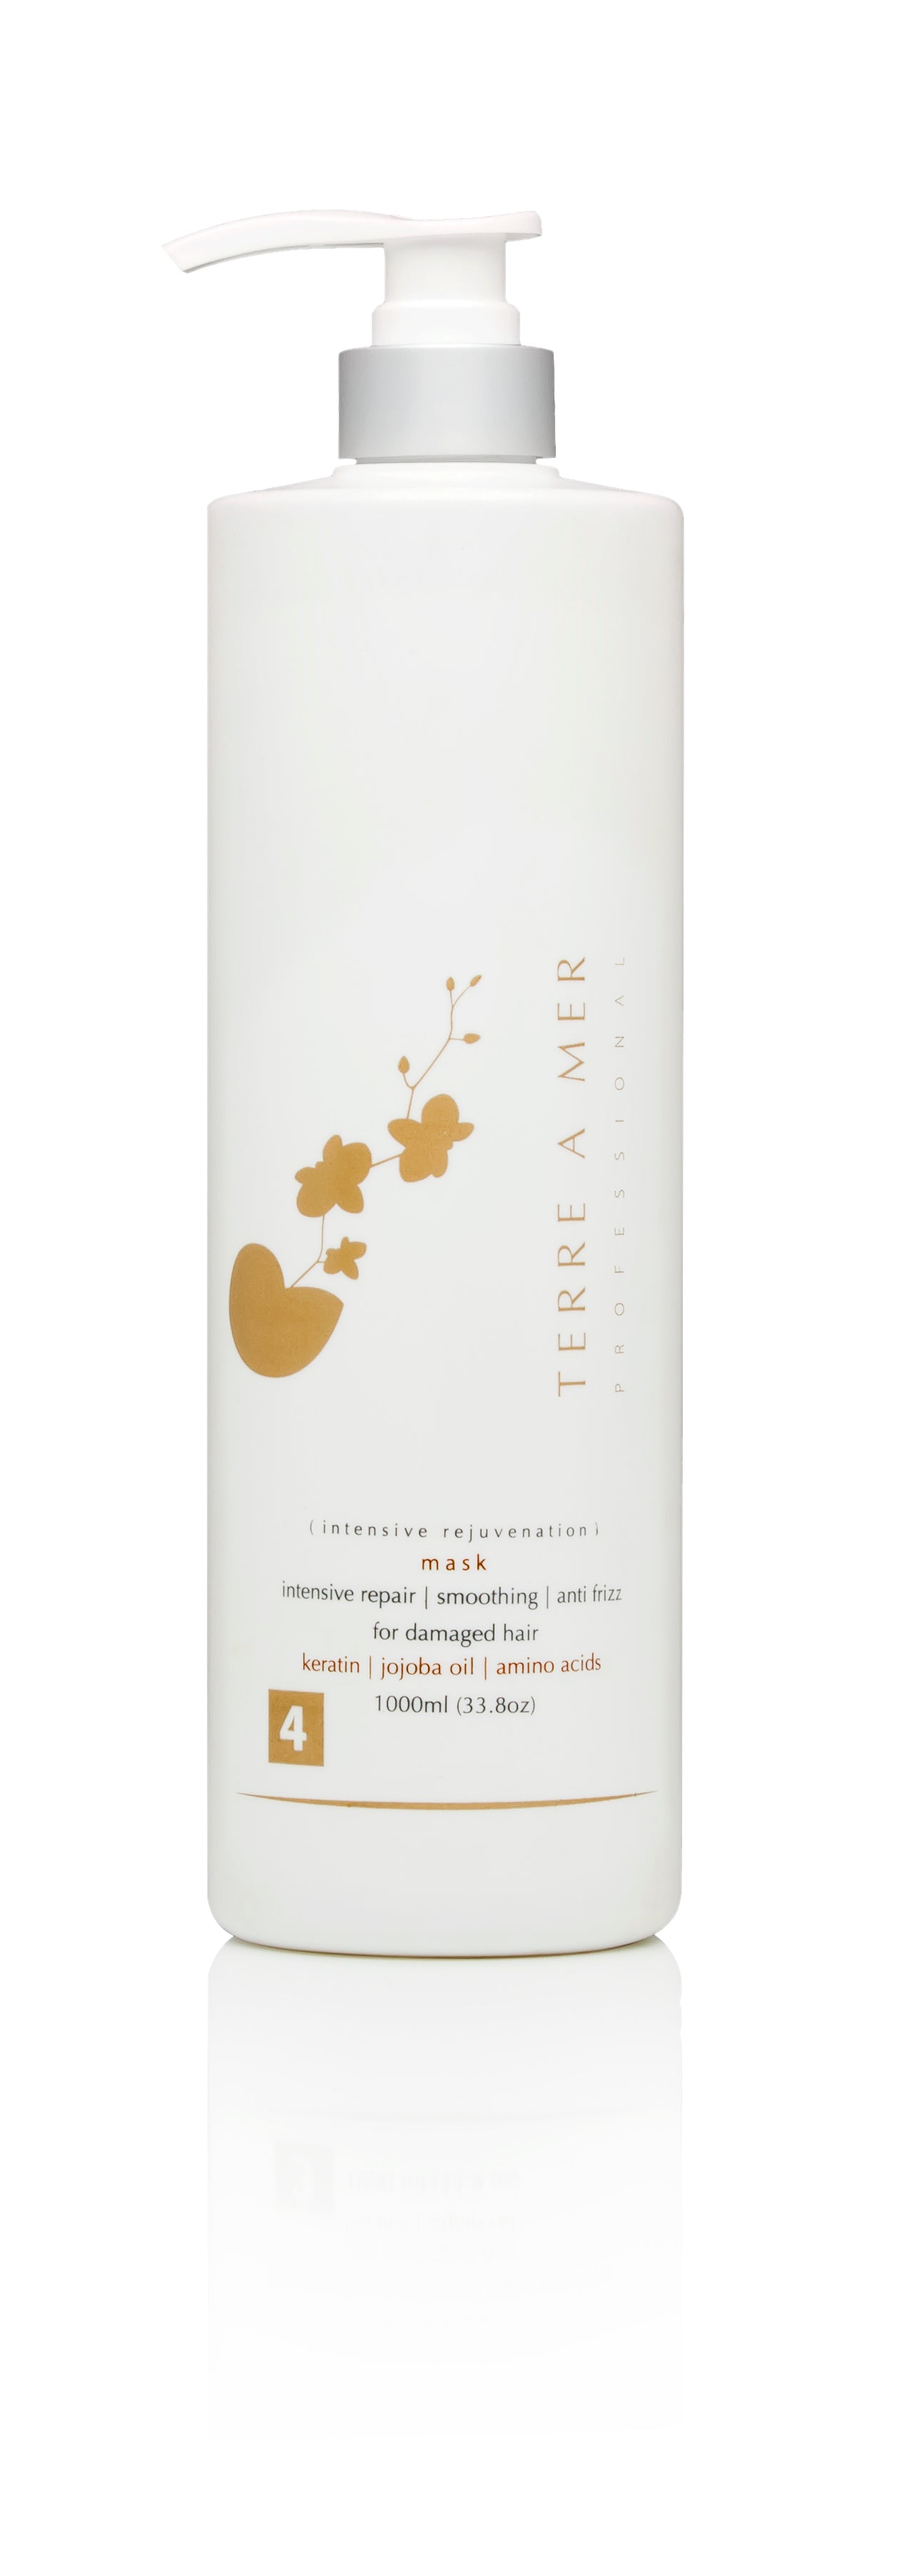 Terre a Mer Keratin Professional System (Complete Set) Value Pack